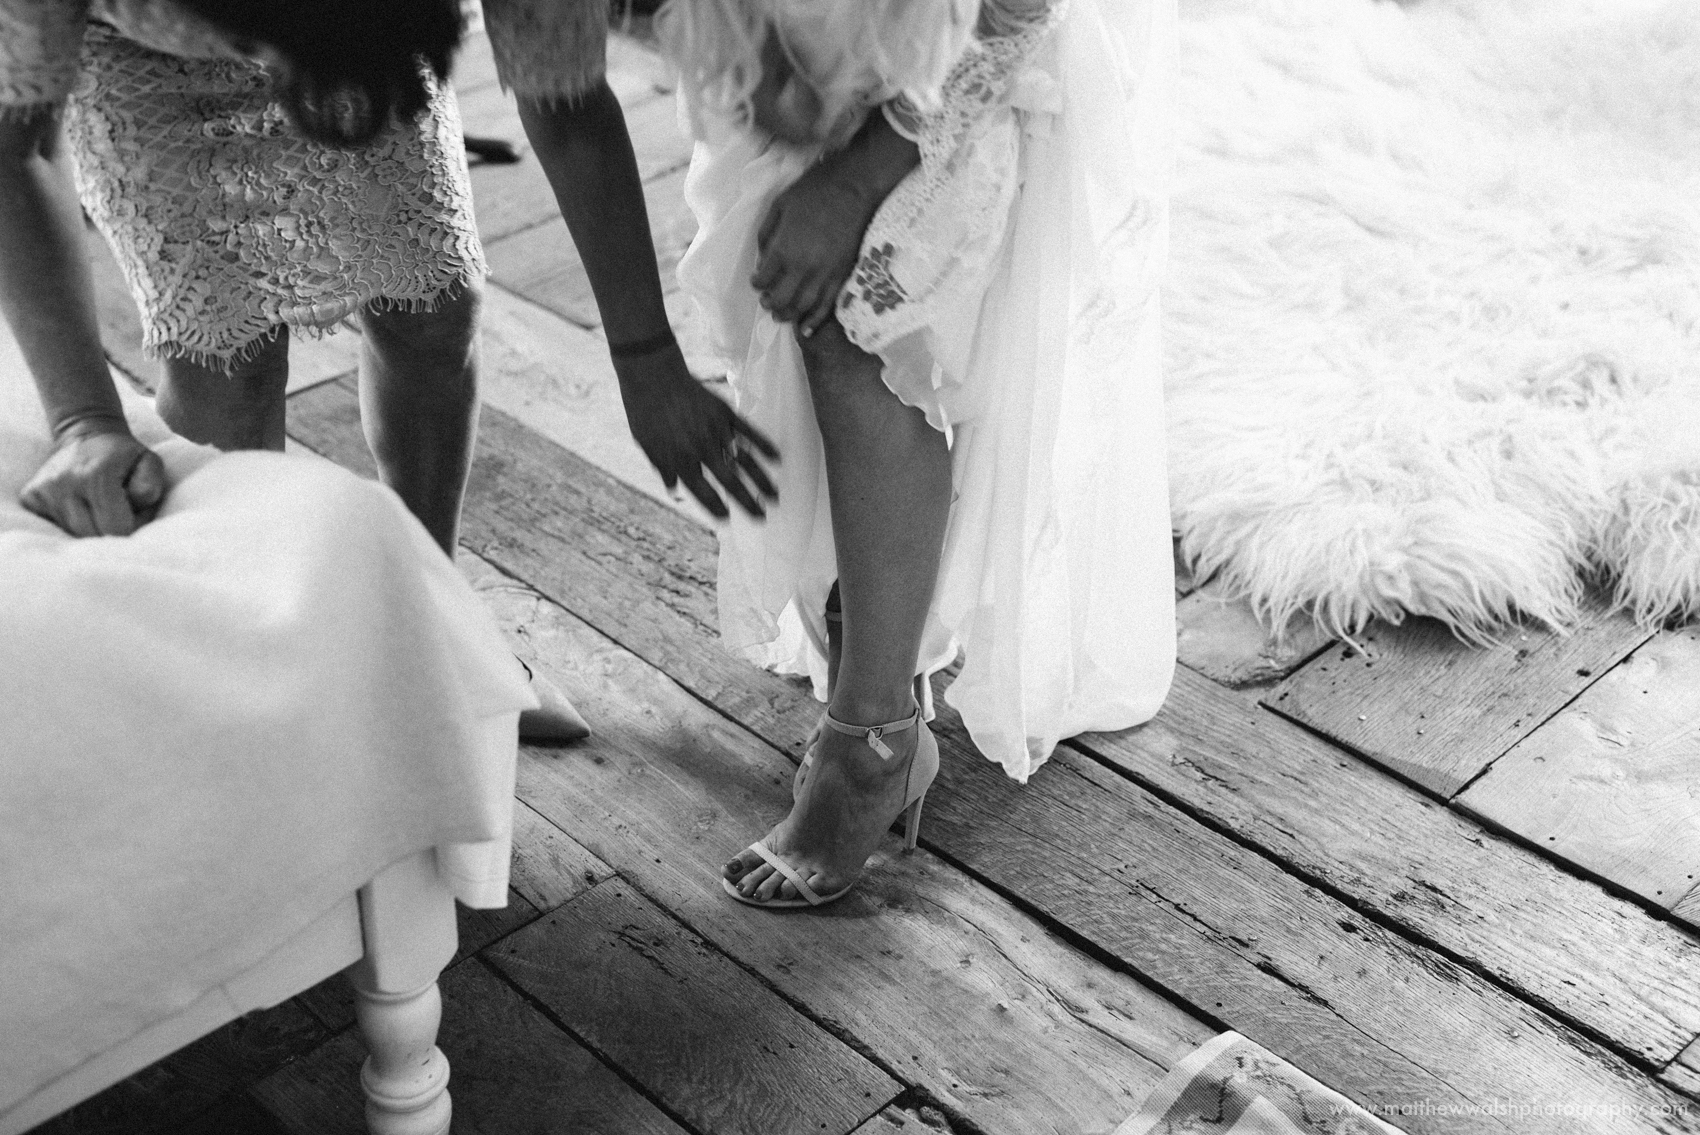 A black and white image of the bride putting her wedding shoes on